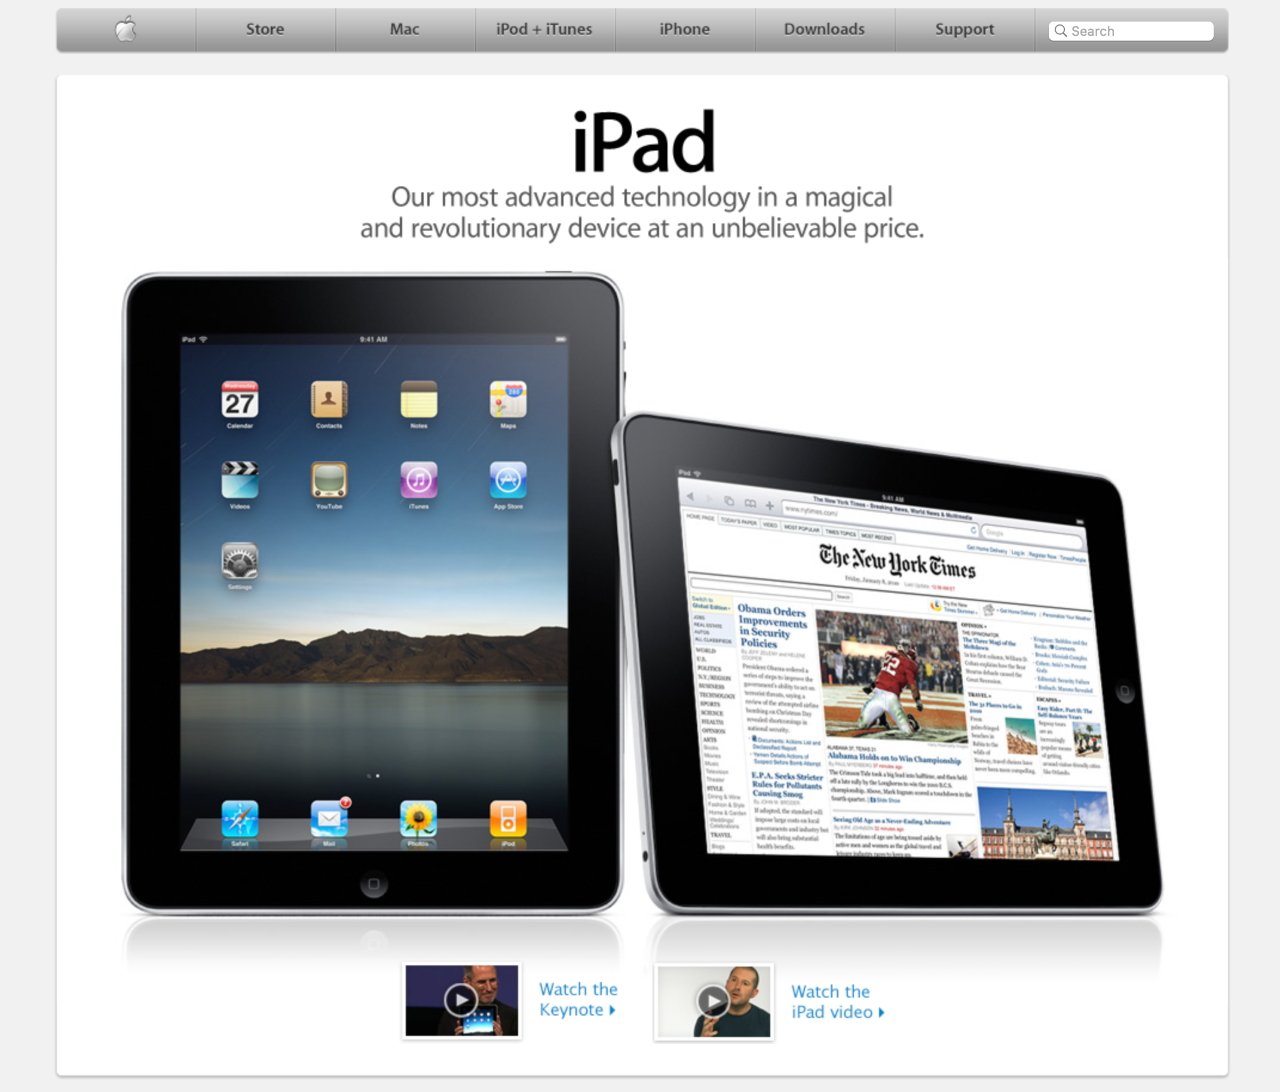 Two Apple iPads showcased with one displaying the calendar app and another showing a news website.